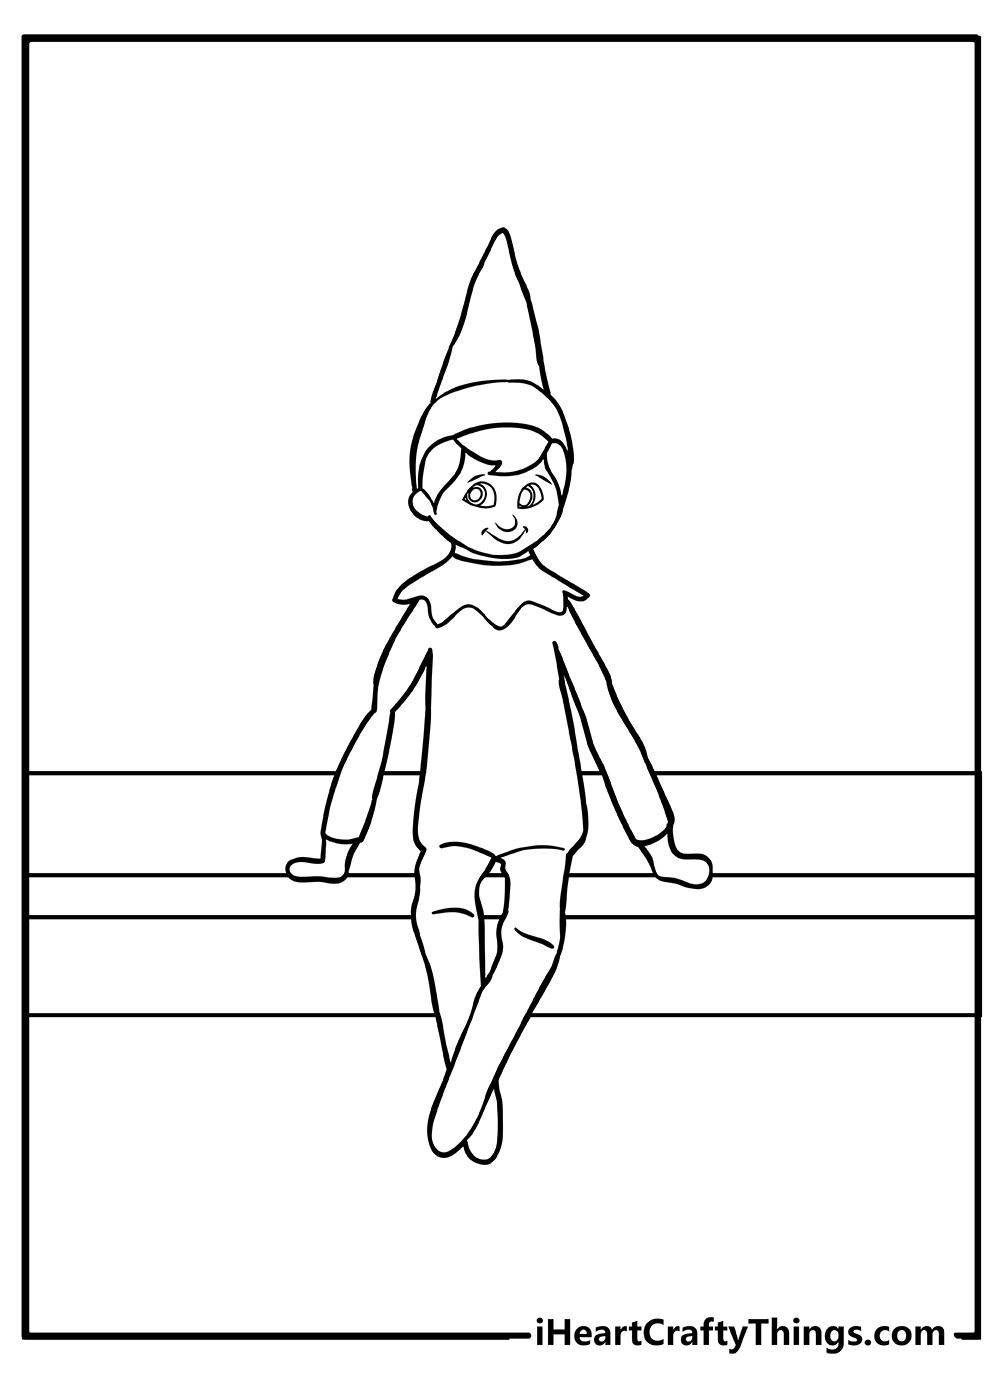 Elf on the shelf coloring pages free printables